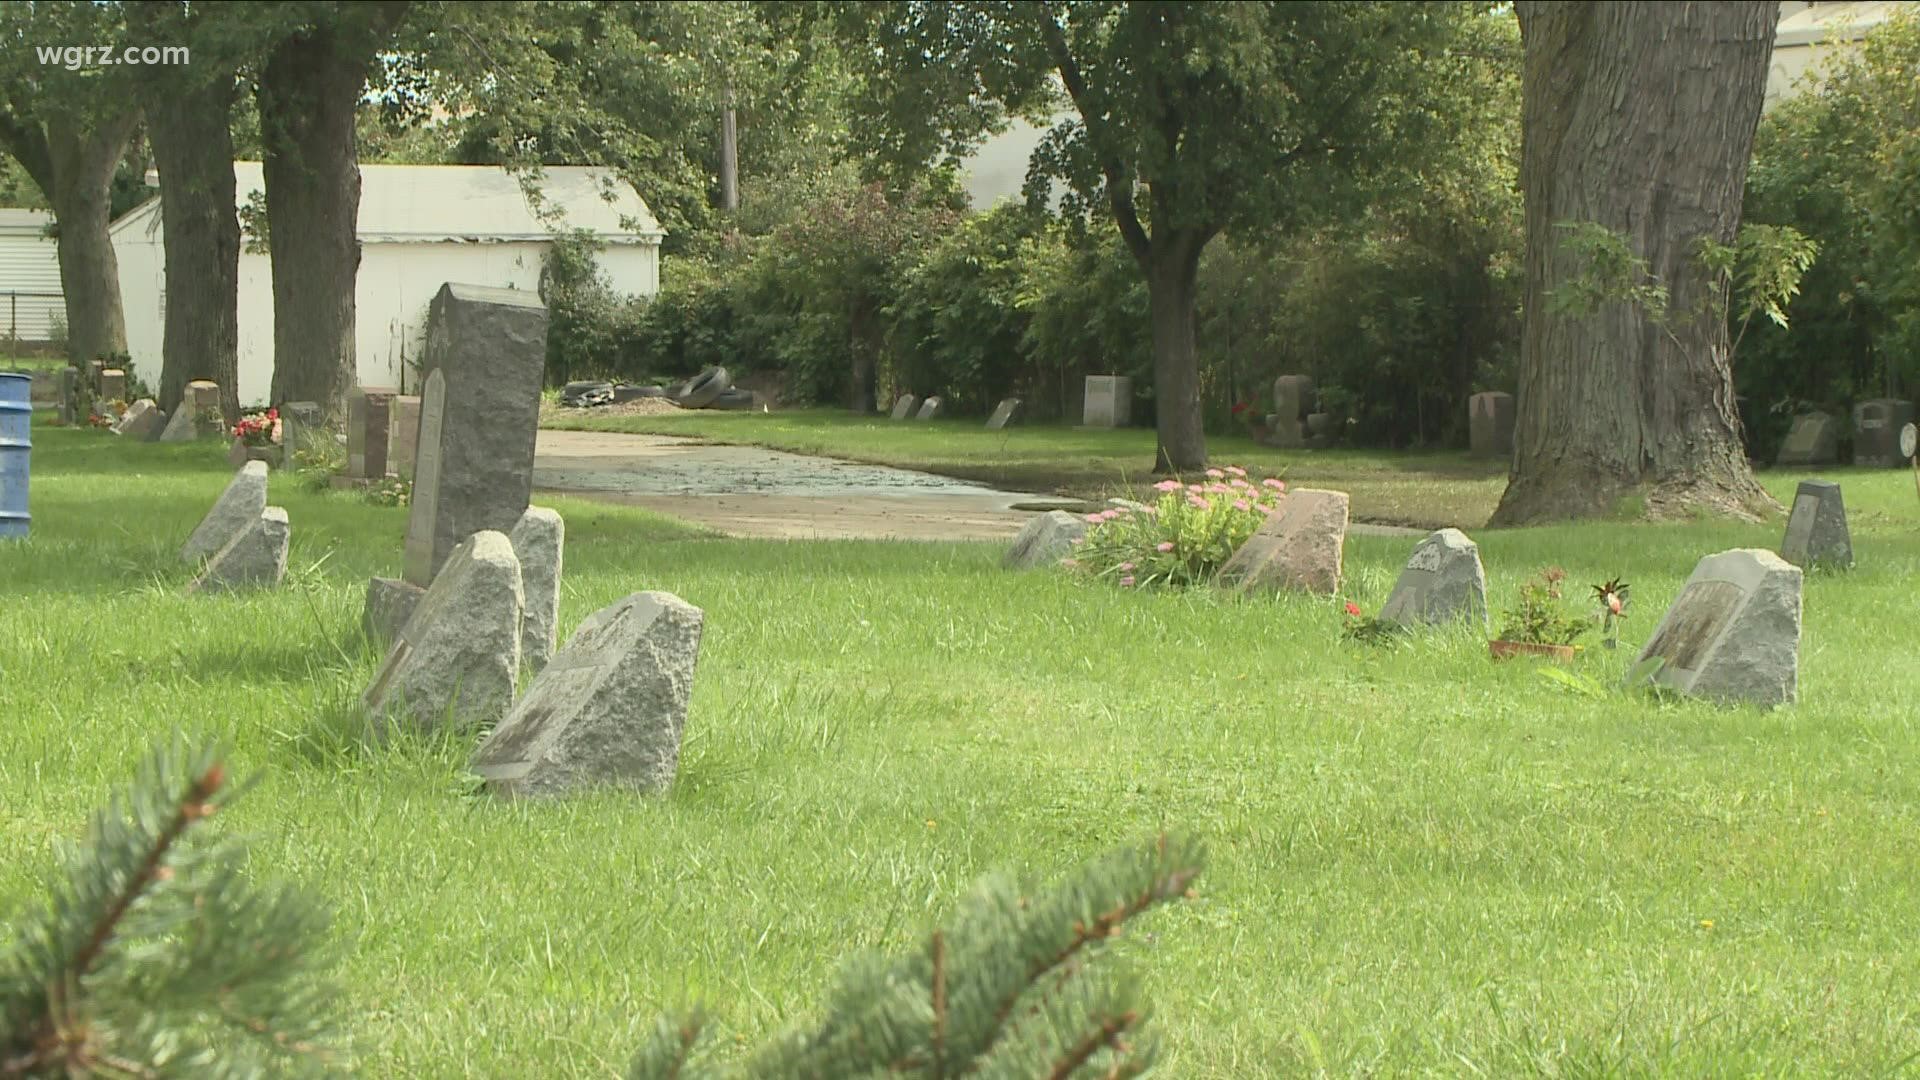 A Cheektowaga cemetery we've done stories about in the past because of flooding issues has flooded again.